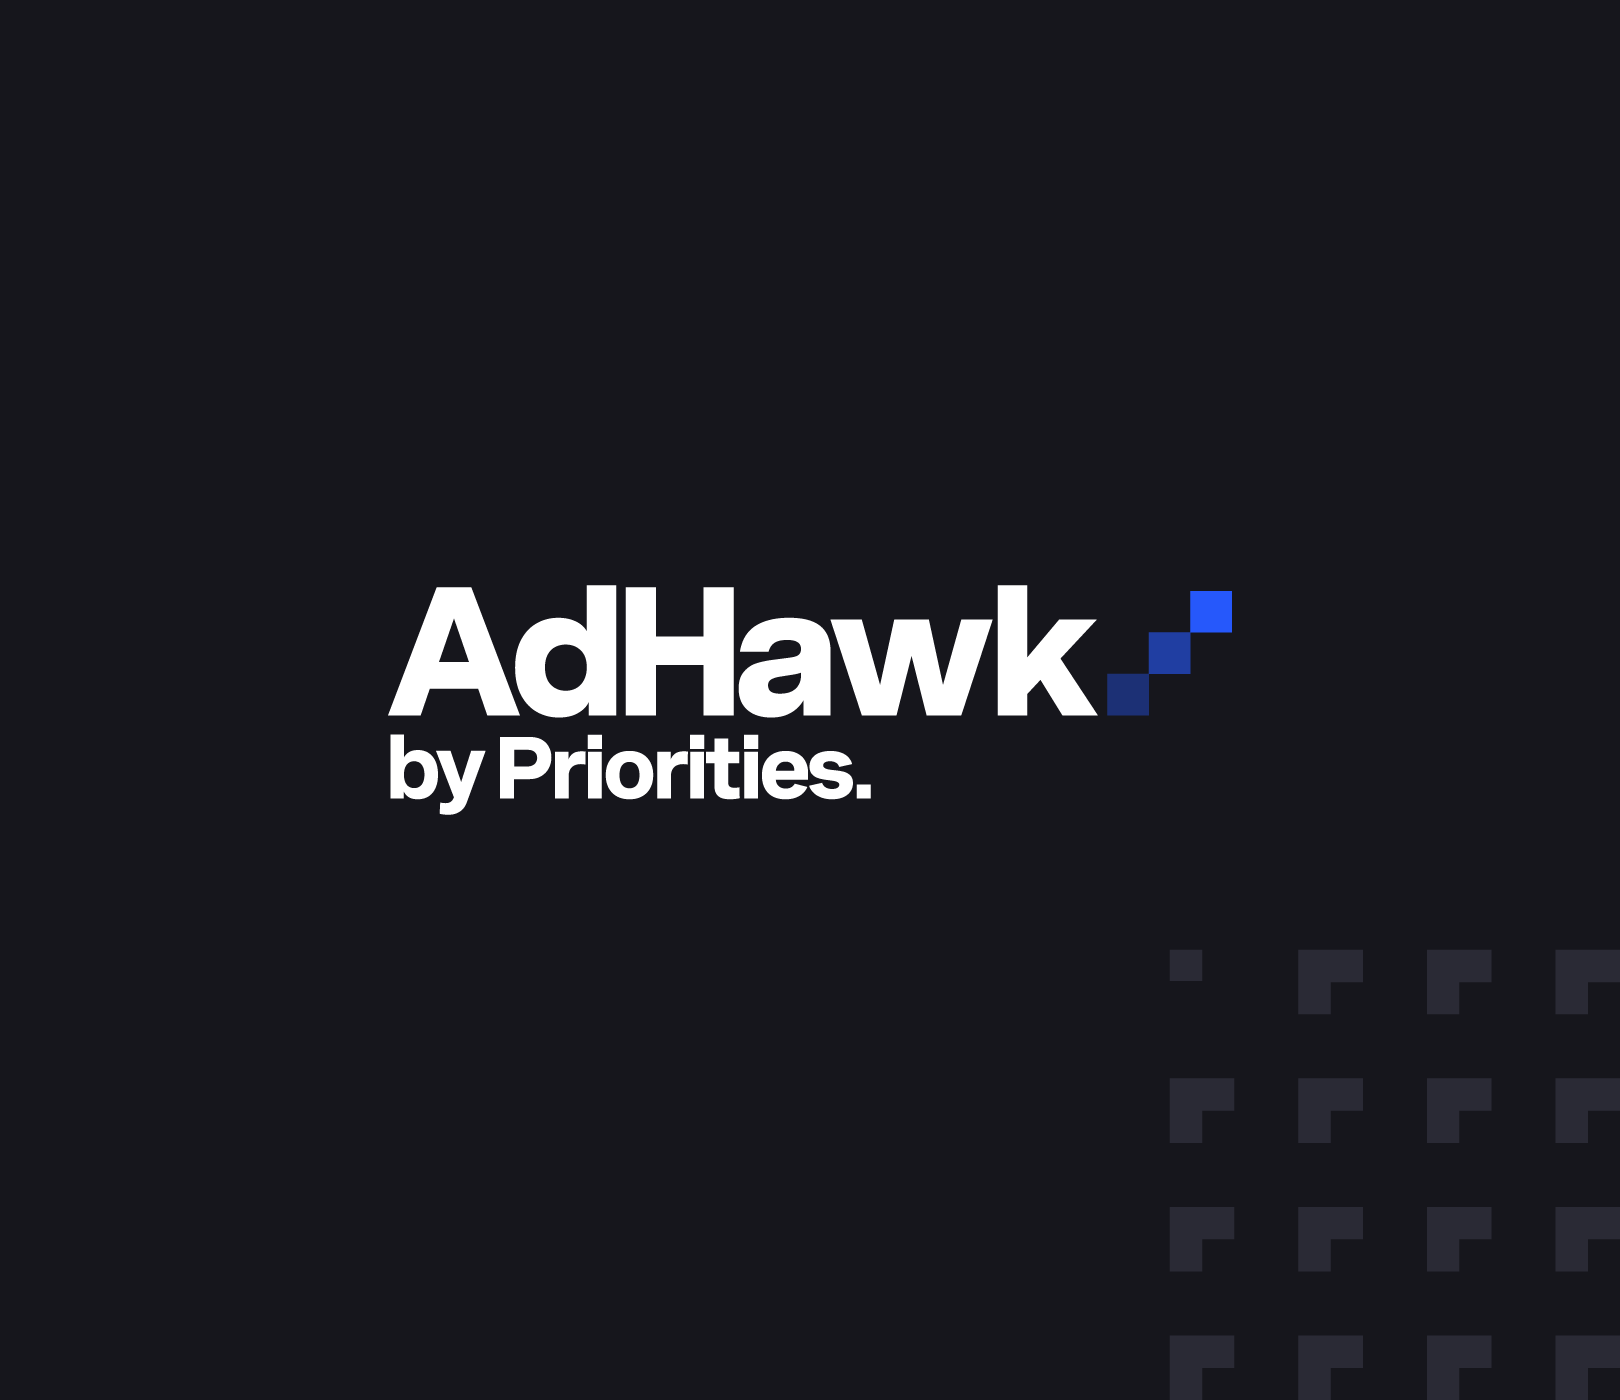 Solid black graphic with white text that reads "AdHawk by Priorities"